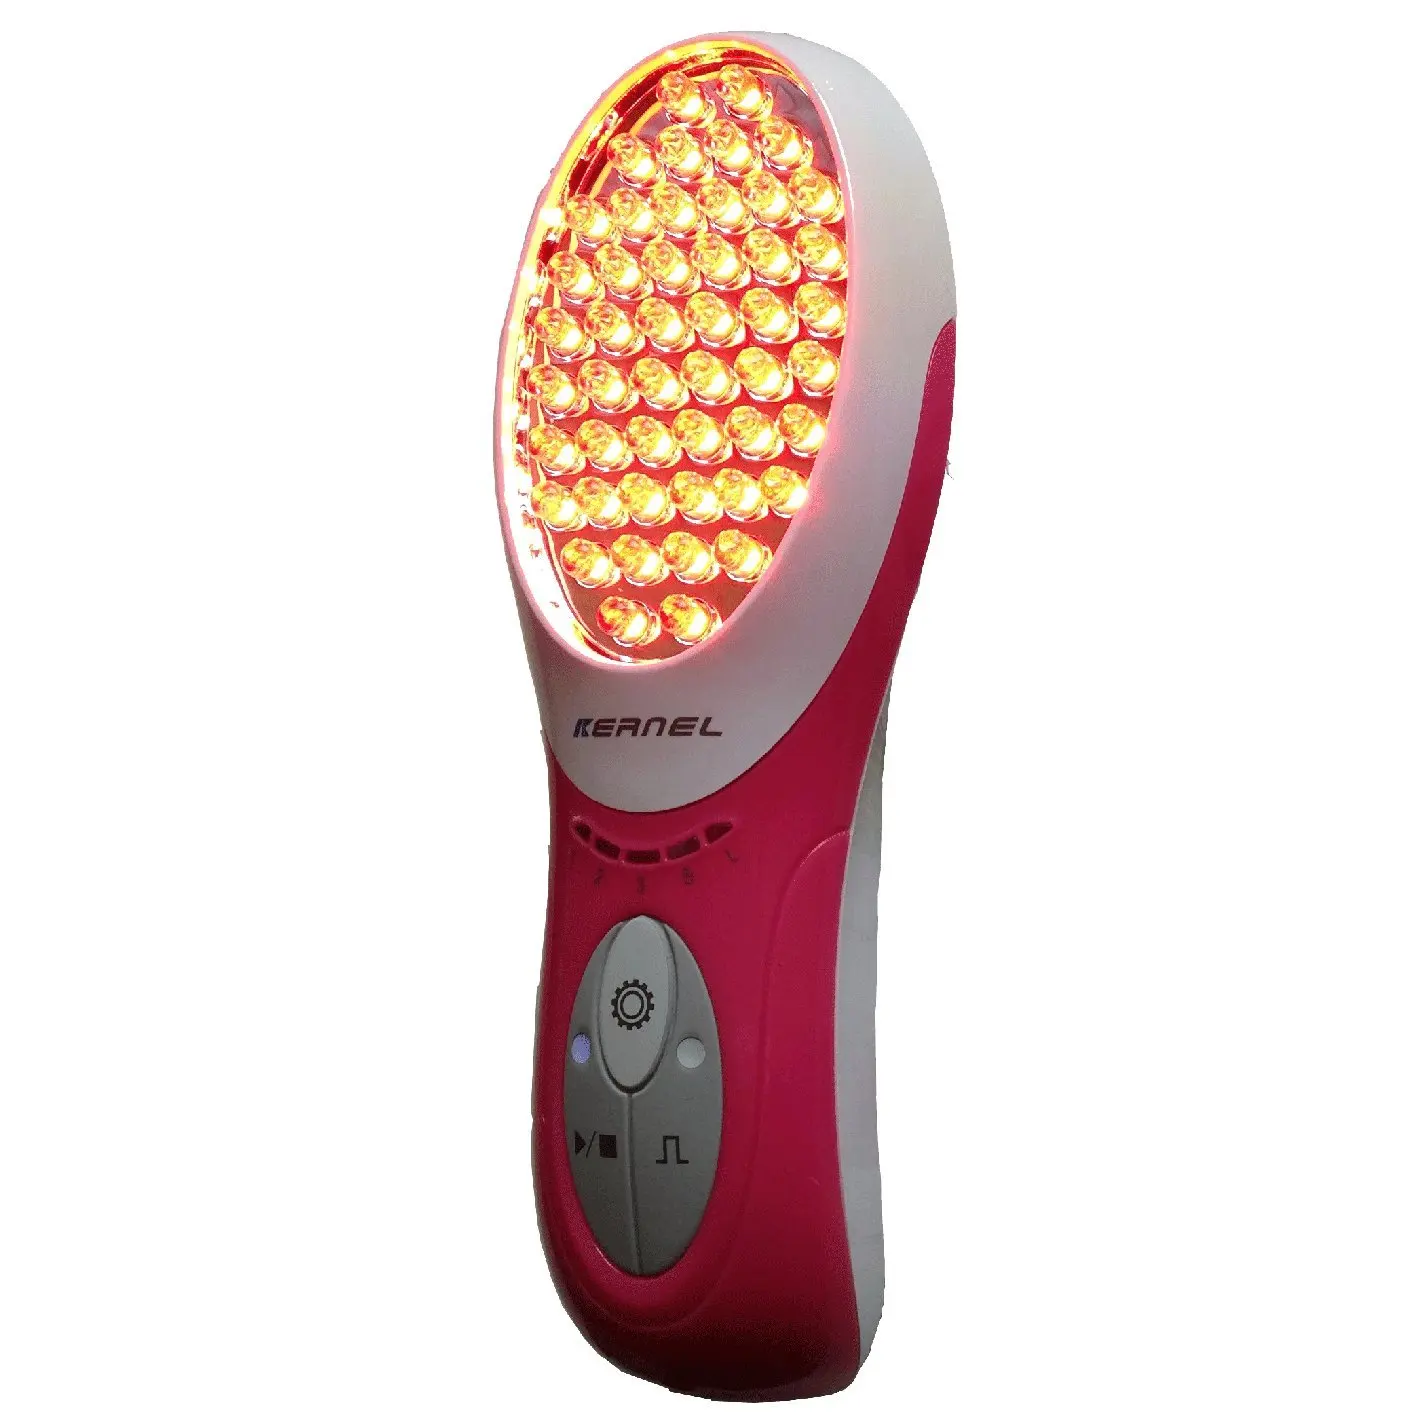 

Kernel KN-7000C hand-held red light therapy 660nm 850nm LED Therapy for Hair, Acne, Pain, Healing & Rejuvenation